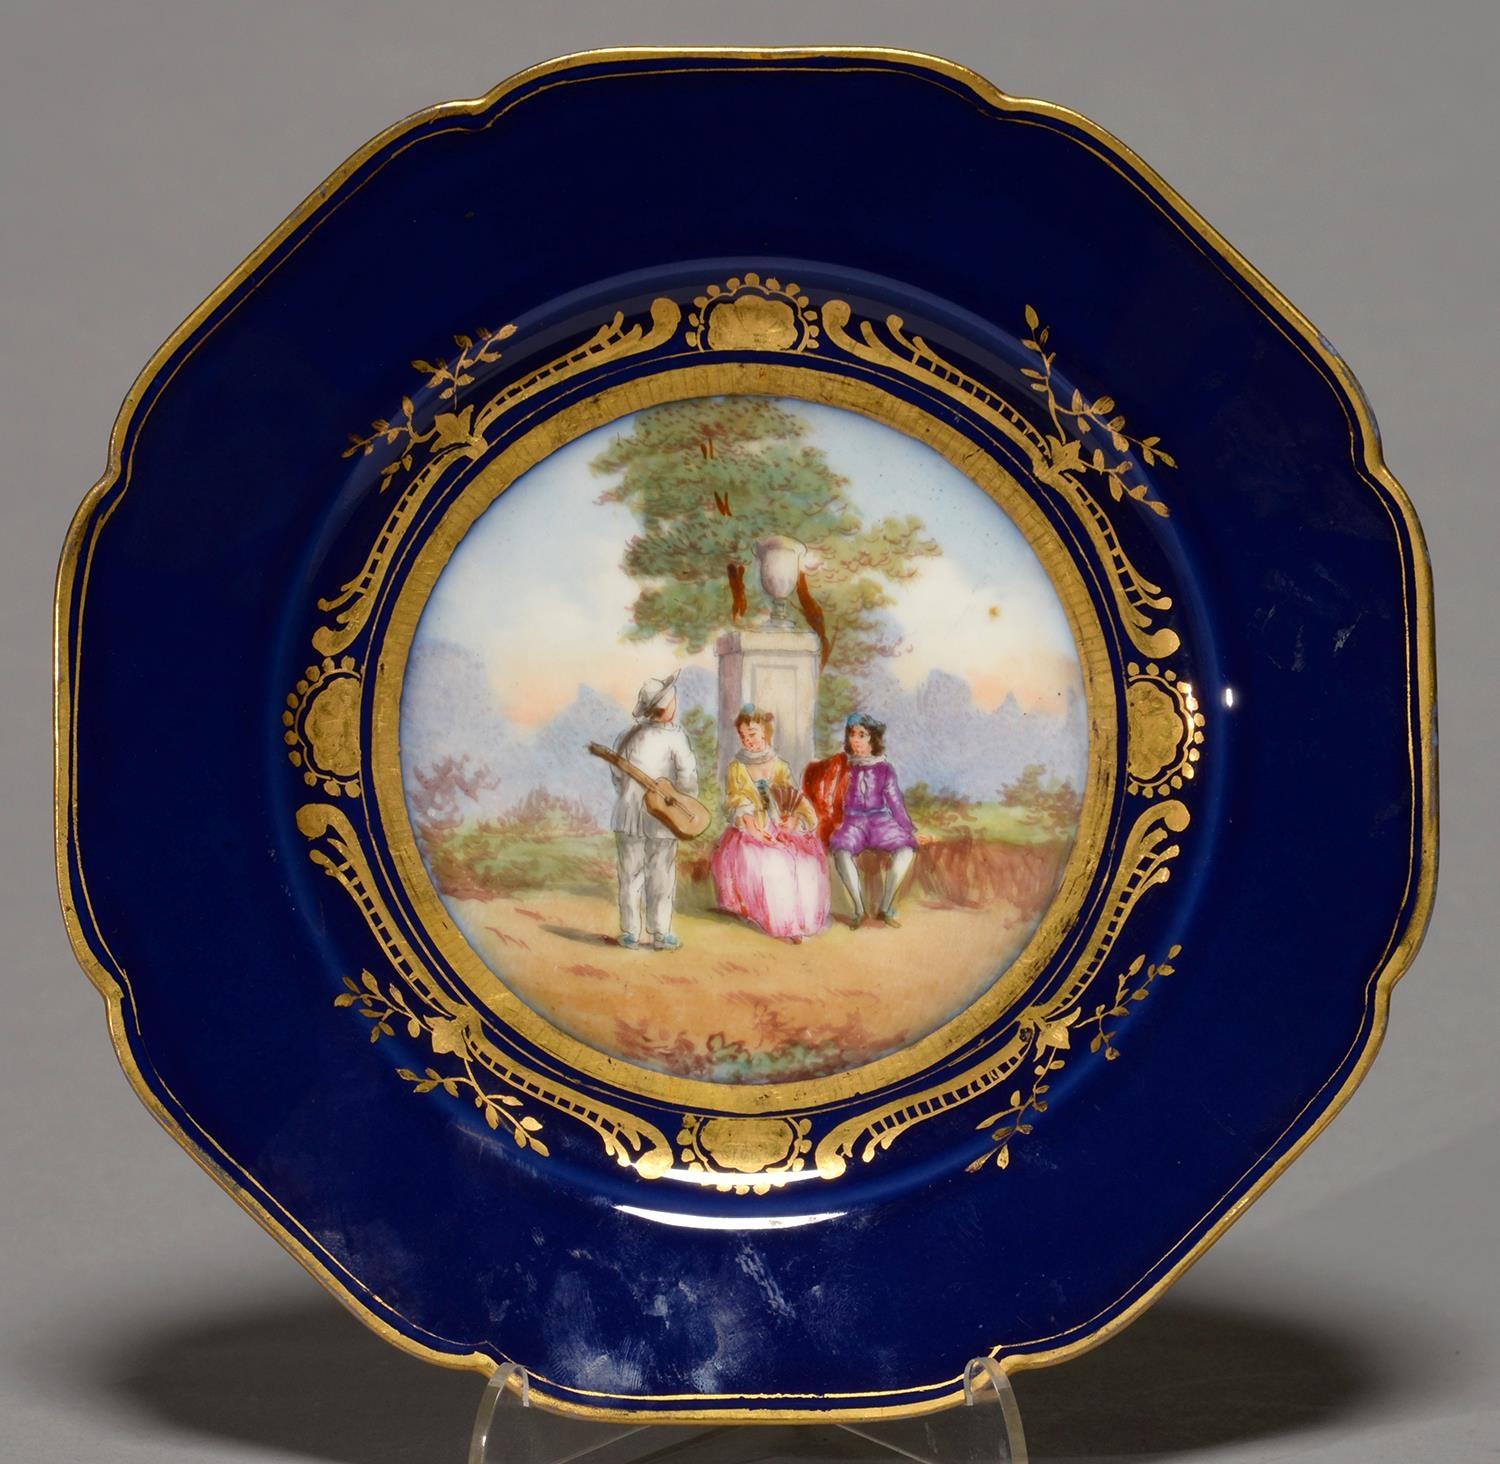 A FRENCH PORCELAIN CABINET PLATE DECORATED IN SEVRES STYLE, C1900, PAINTED WITH A WATTOESQUE SCENE